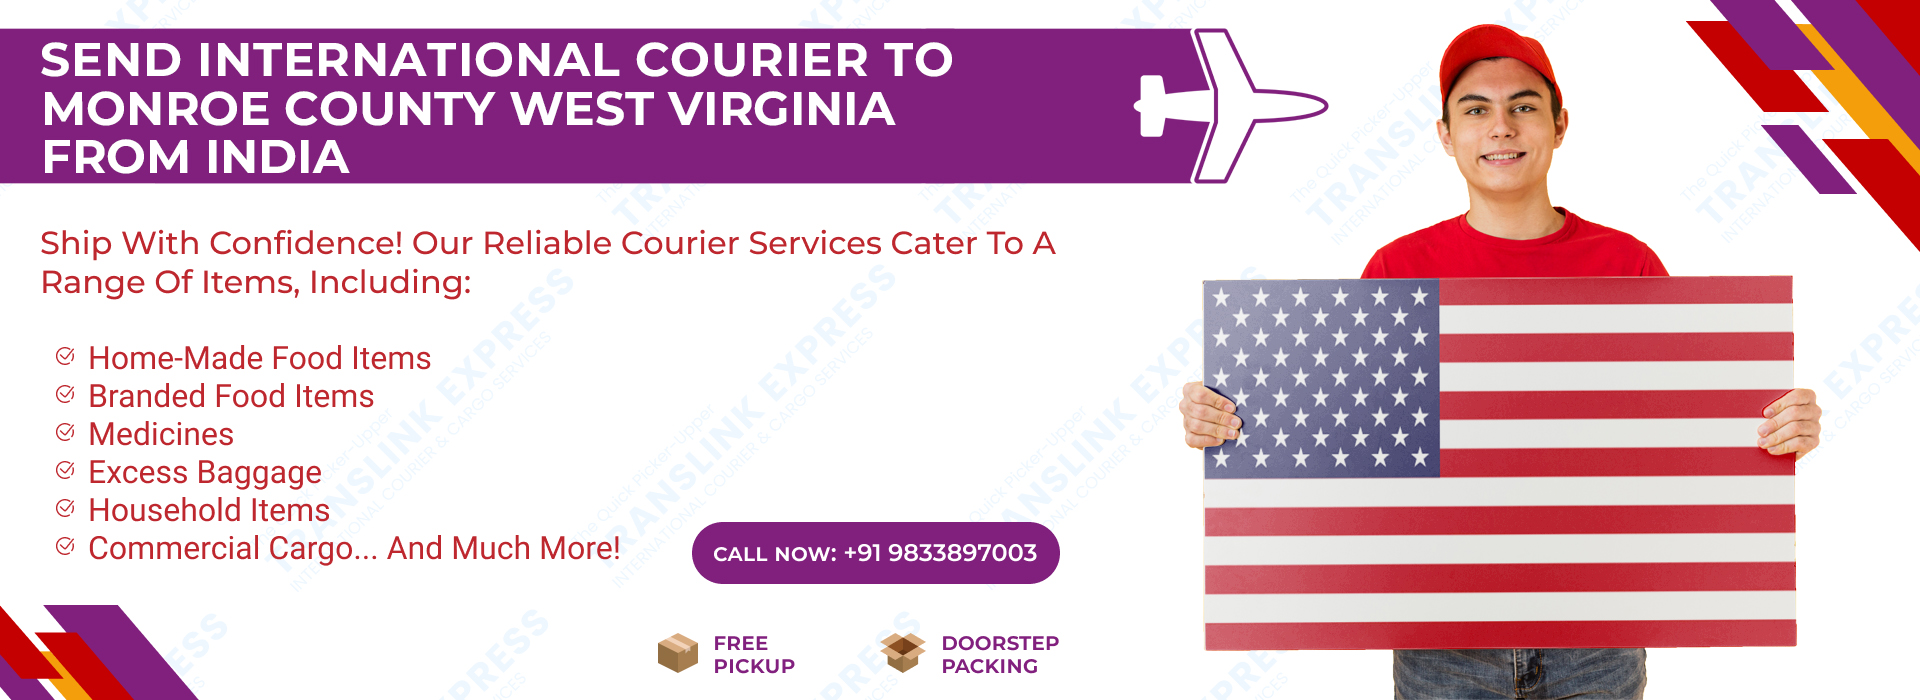 Courier to Monroe County West Virginia From India